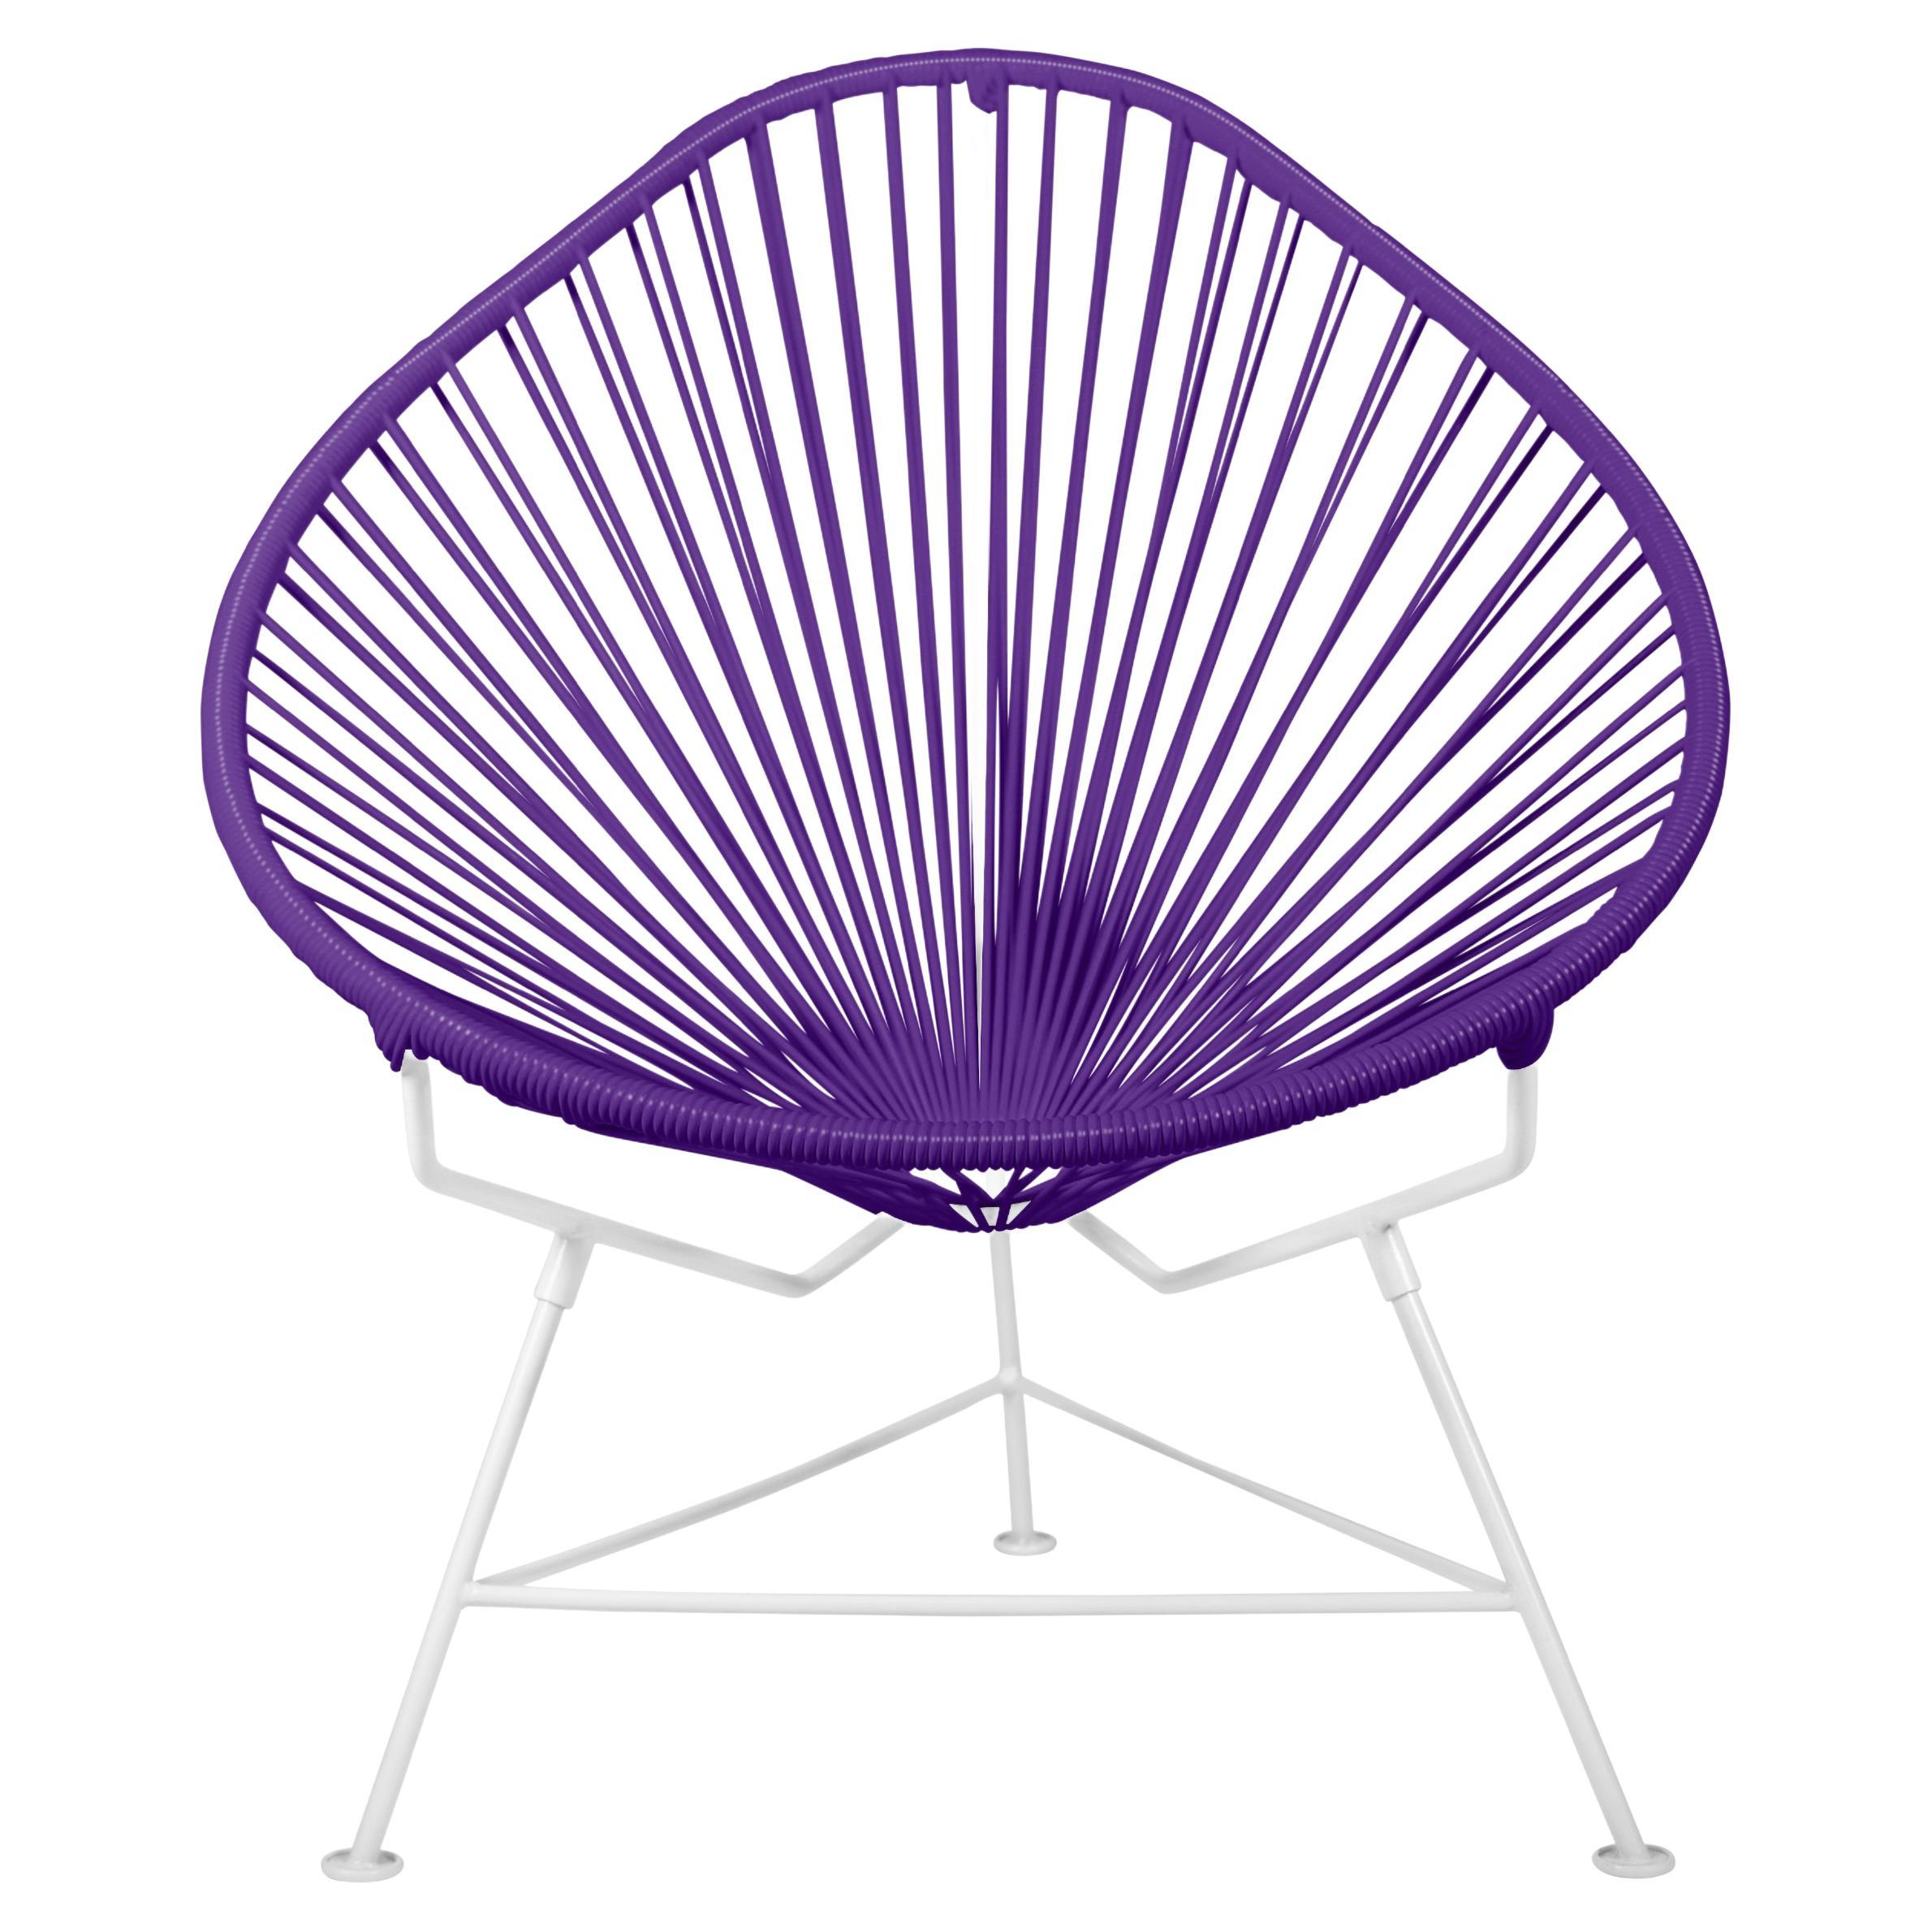 Innit Designs Acapulco Chair Purple Weave on White Frame For Sale